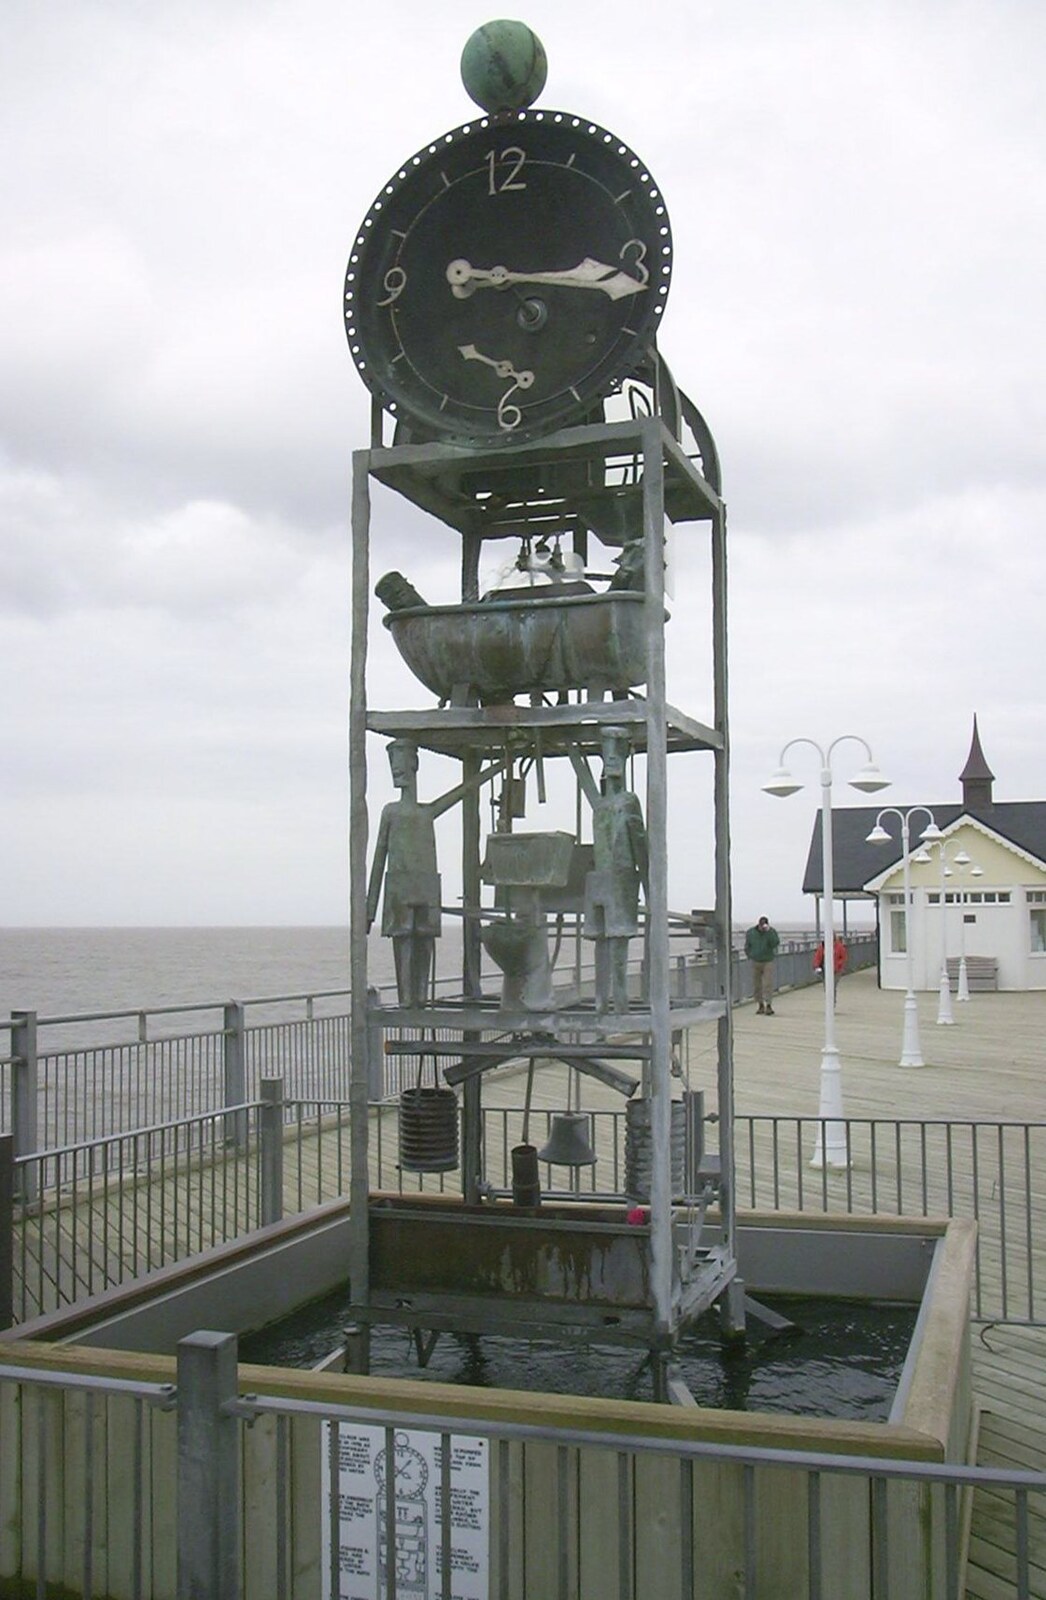 Tim Hunkin's brilliant water clock from Moping in Southwold, Suffolk - 3rd April 2004